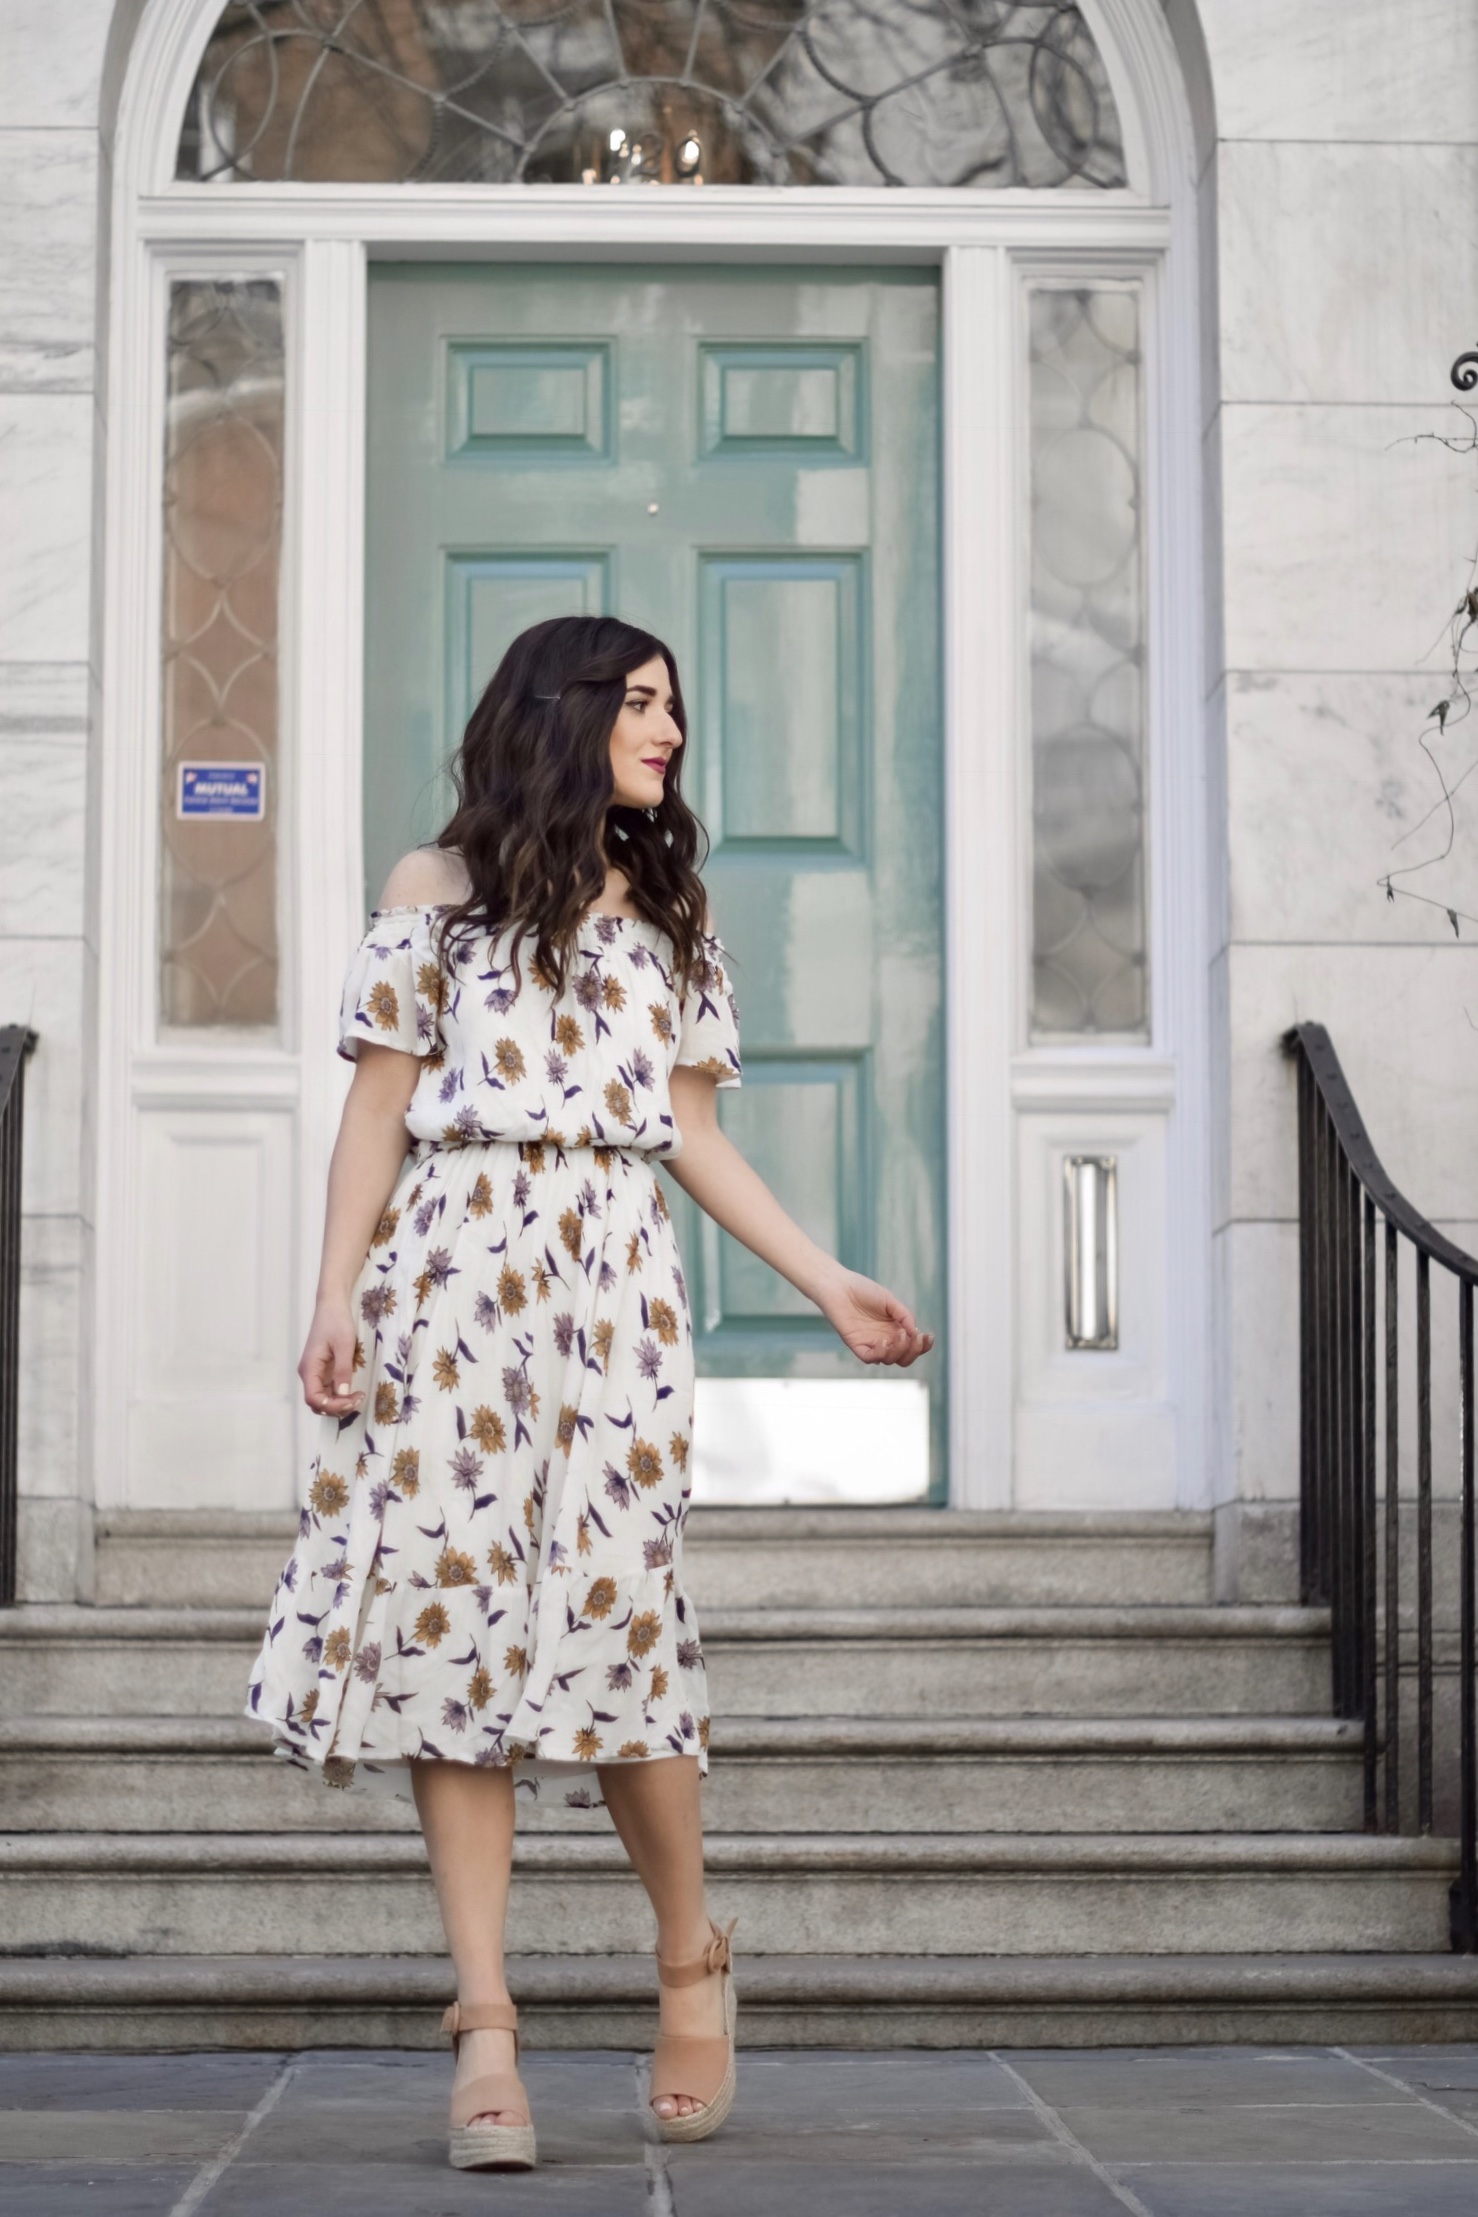 Floral Cold Shoulder Dress Espadrille Wedges My Top 3 Rules Of Business Esther Santer Fashion Blog NYC Street Style Blogger Outfit OOTD Trendy Old Navy Marc Fisher Beautiful Photoshoot New York City Summer Spring Shoes How To Wear Shopping Wardrobe.jpg